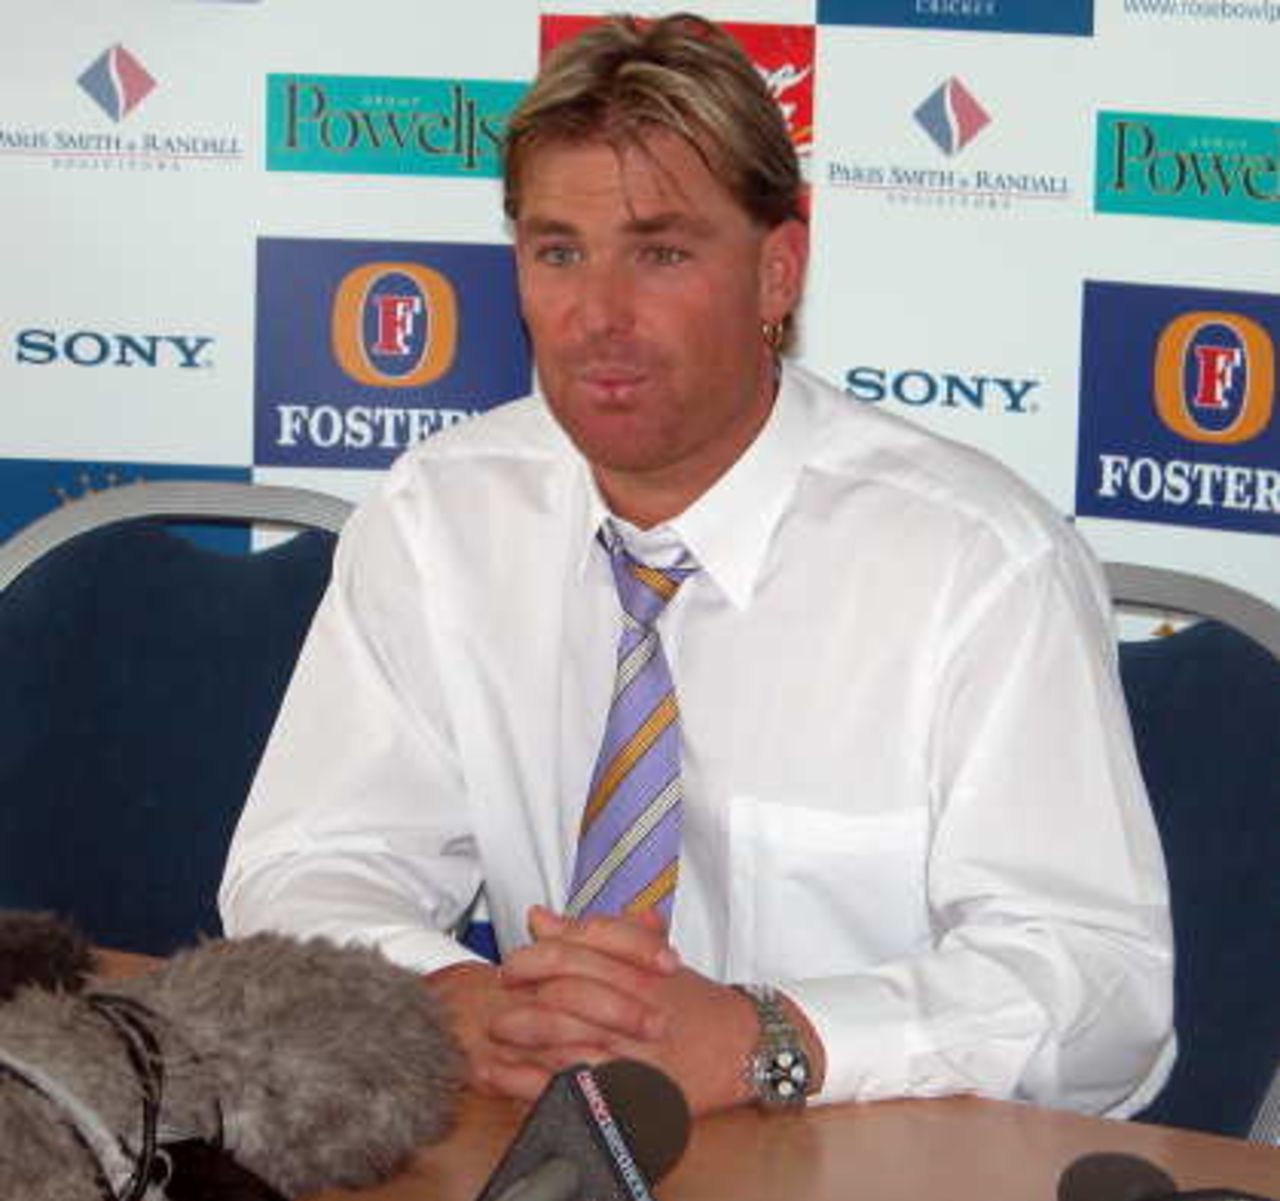 Shane Warne talking to the press at The Rose Bowl - July 2003